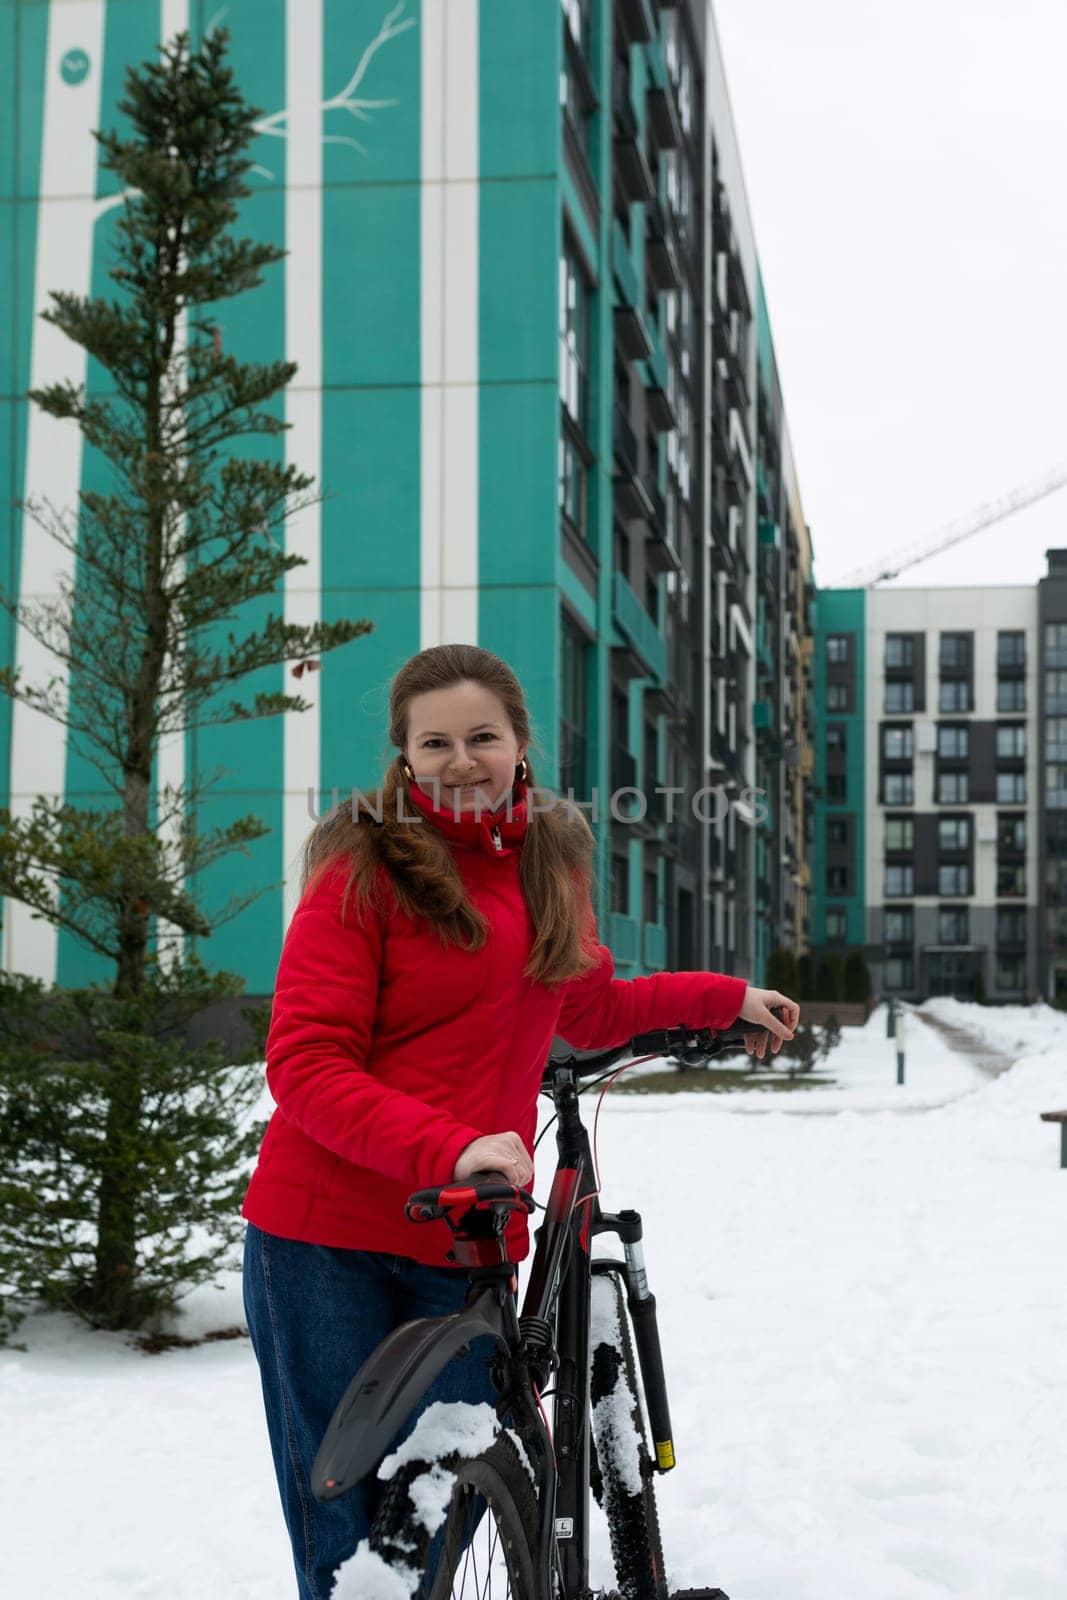 A young woman went on a winter bike ride around the city.